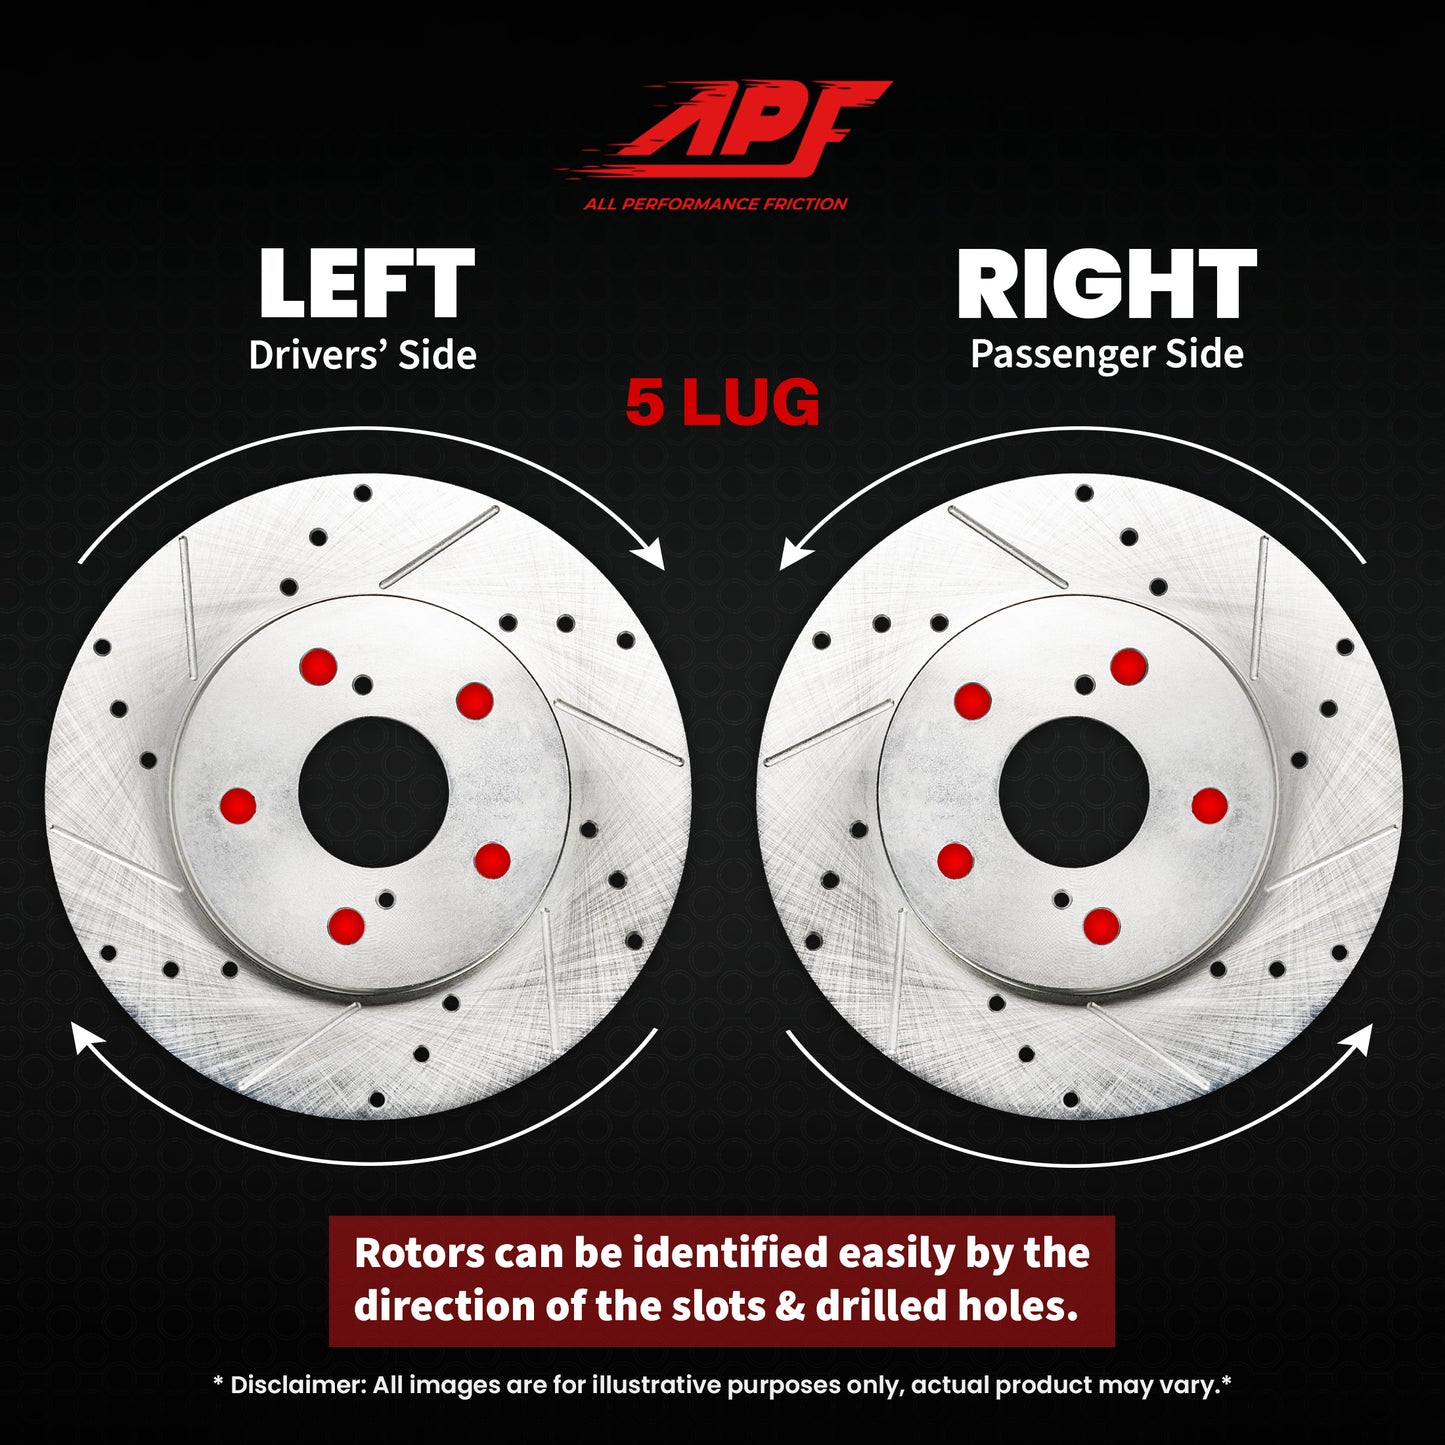 APF All Performance Friction Front Rotors compatible with Buick Allure 2010-2010 Zinc Drilled Slotted Rotors | $172.82